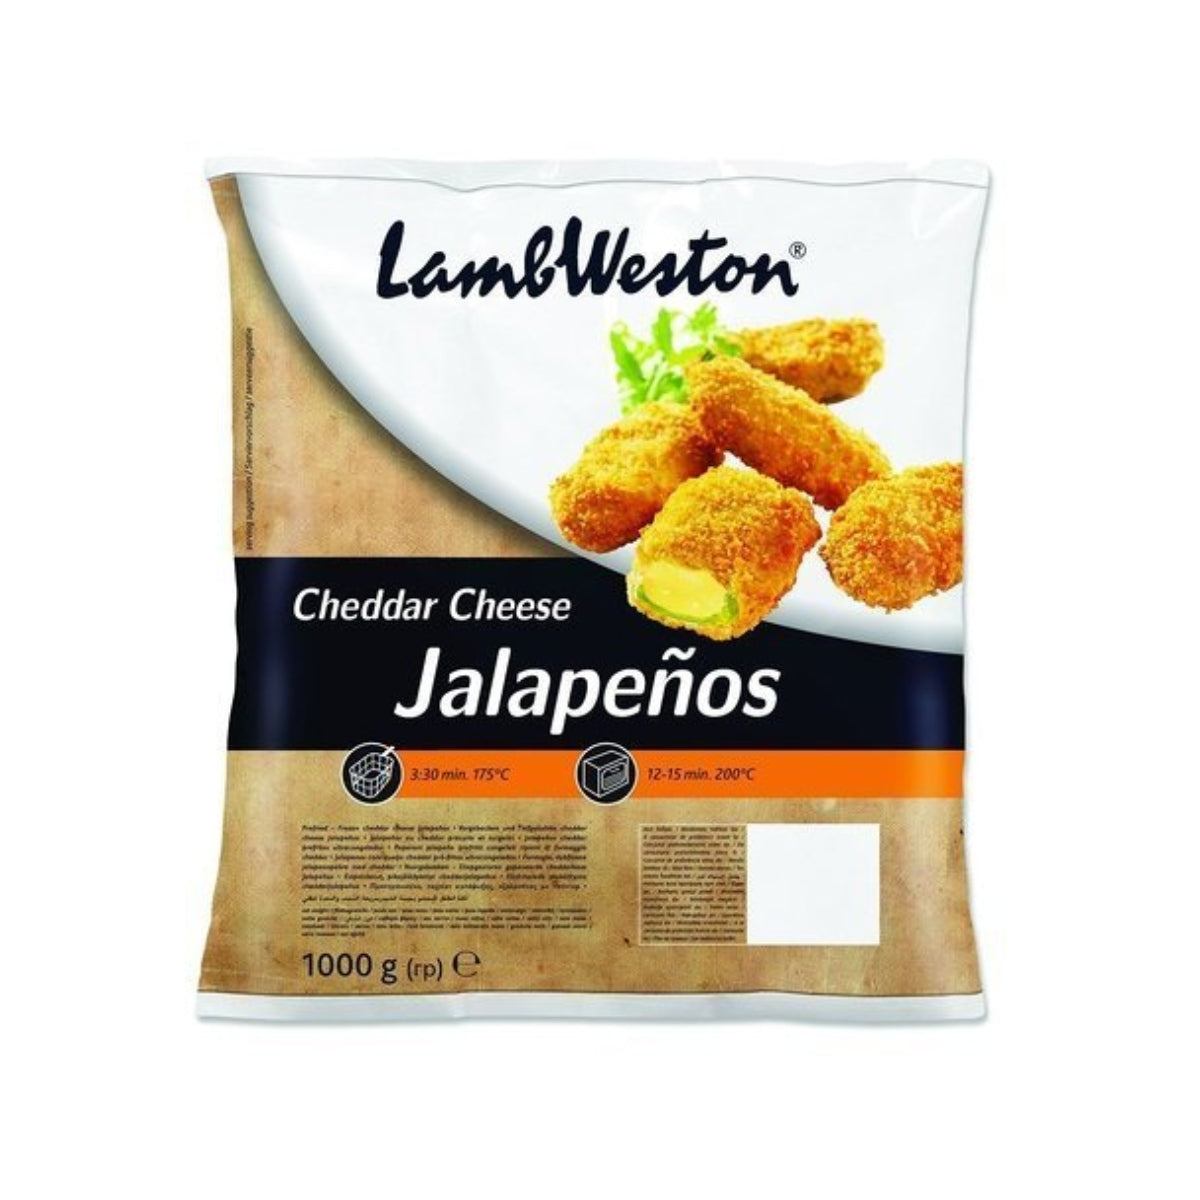 Cheddar Cheese Jalapenos 1kg